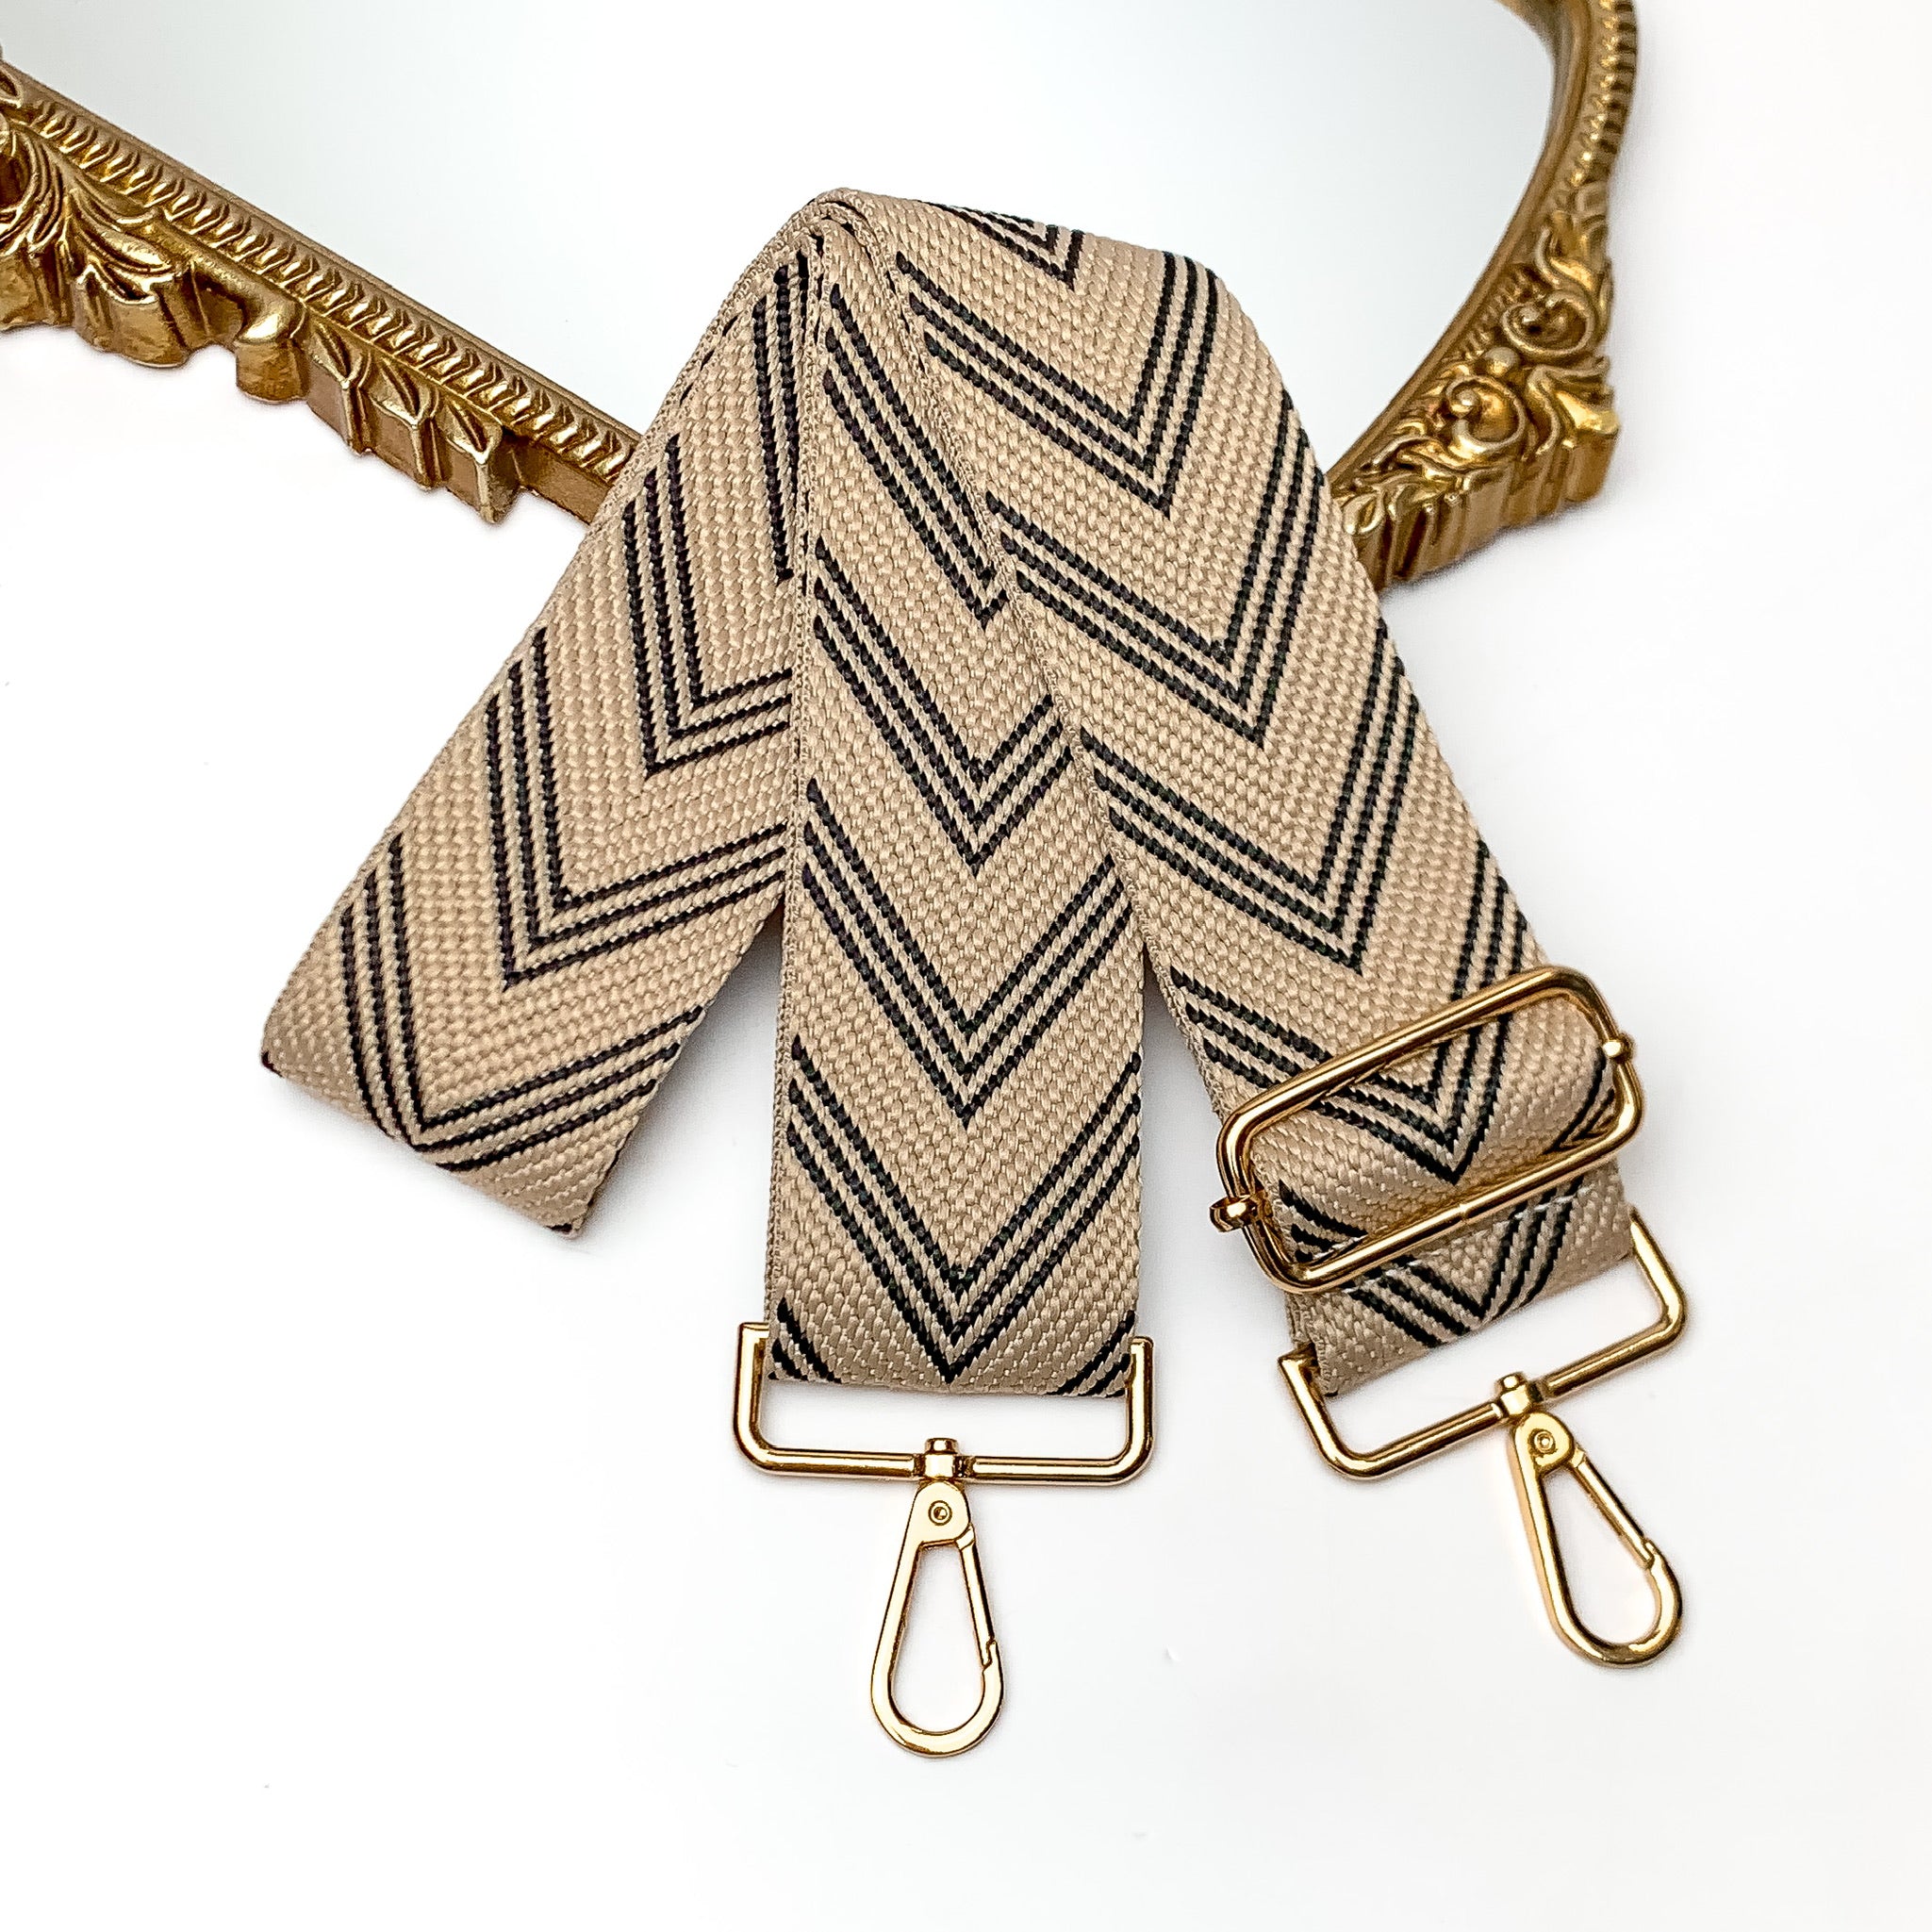 Striped Adjustable Purse Strap in Beige and Black - Giddy Up Glamour Boutique